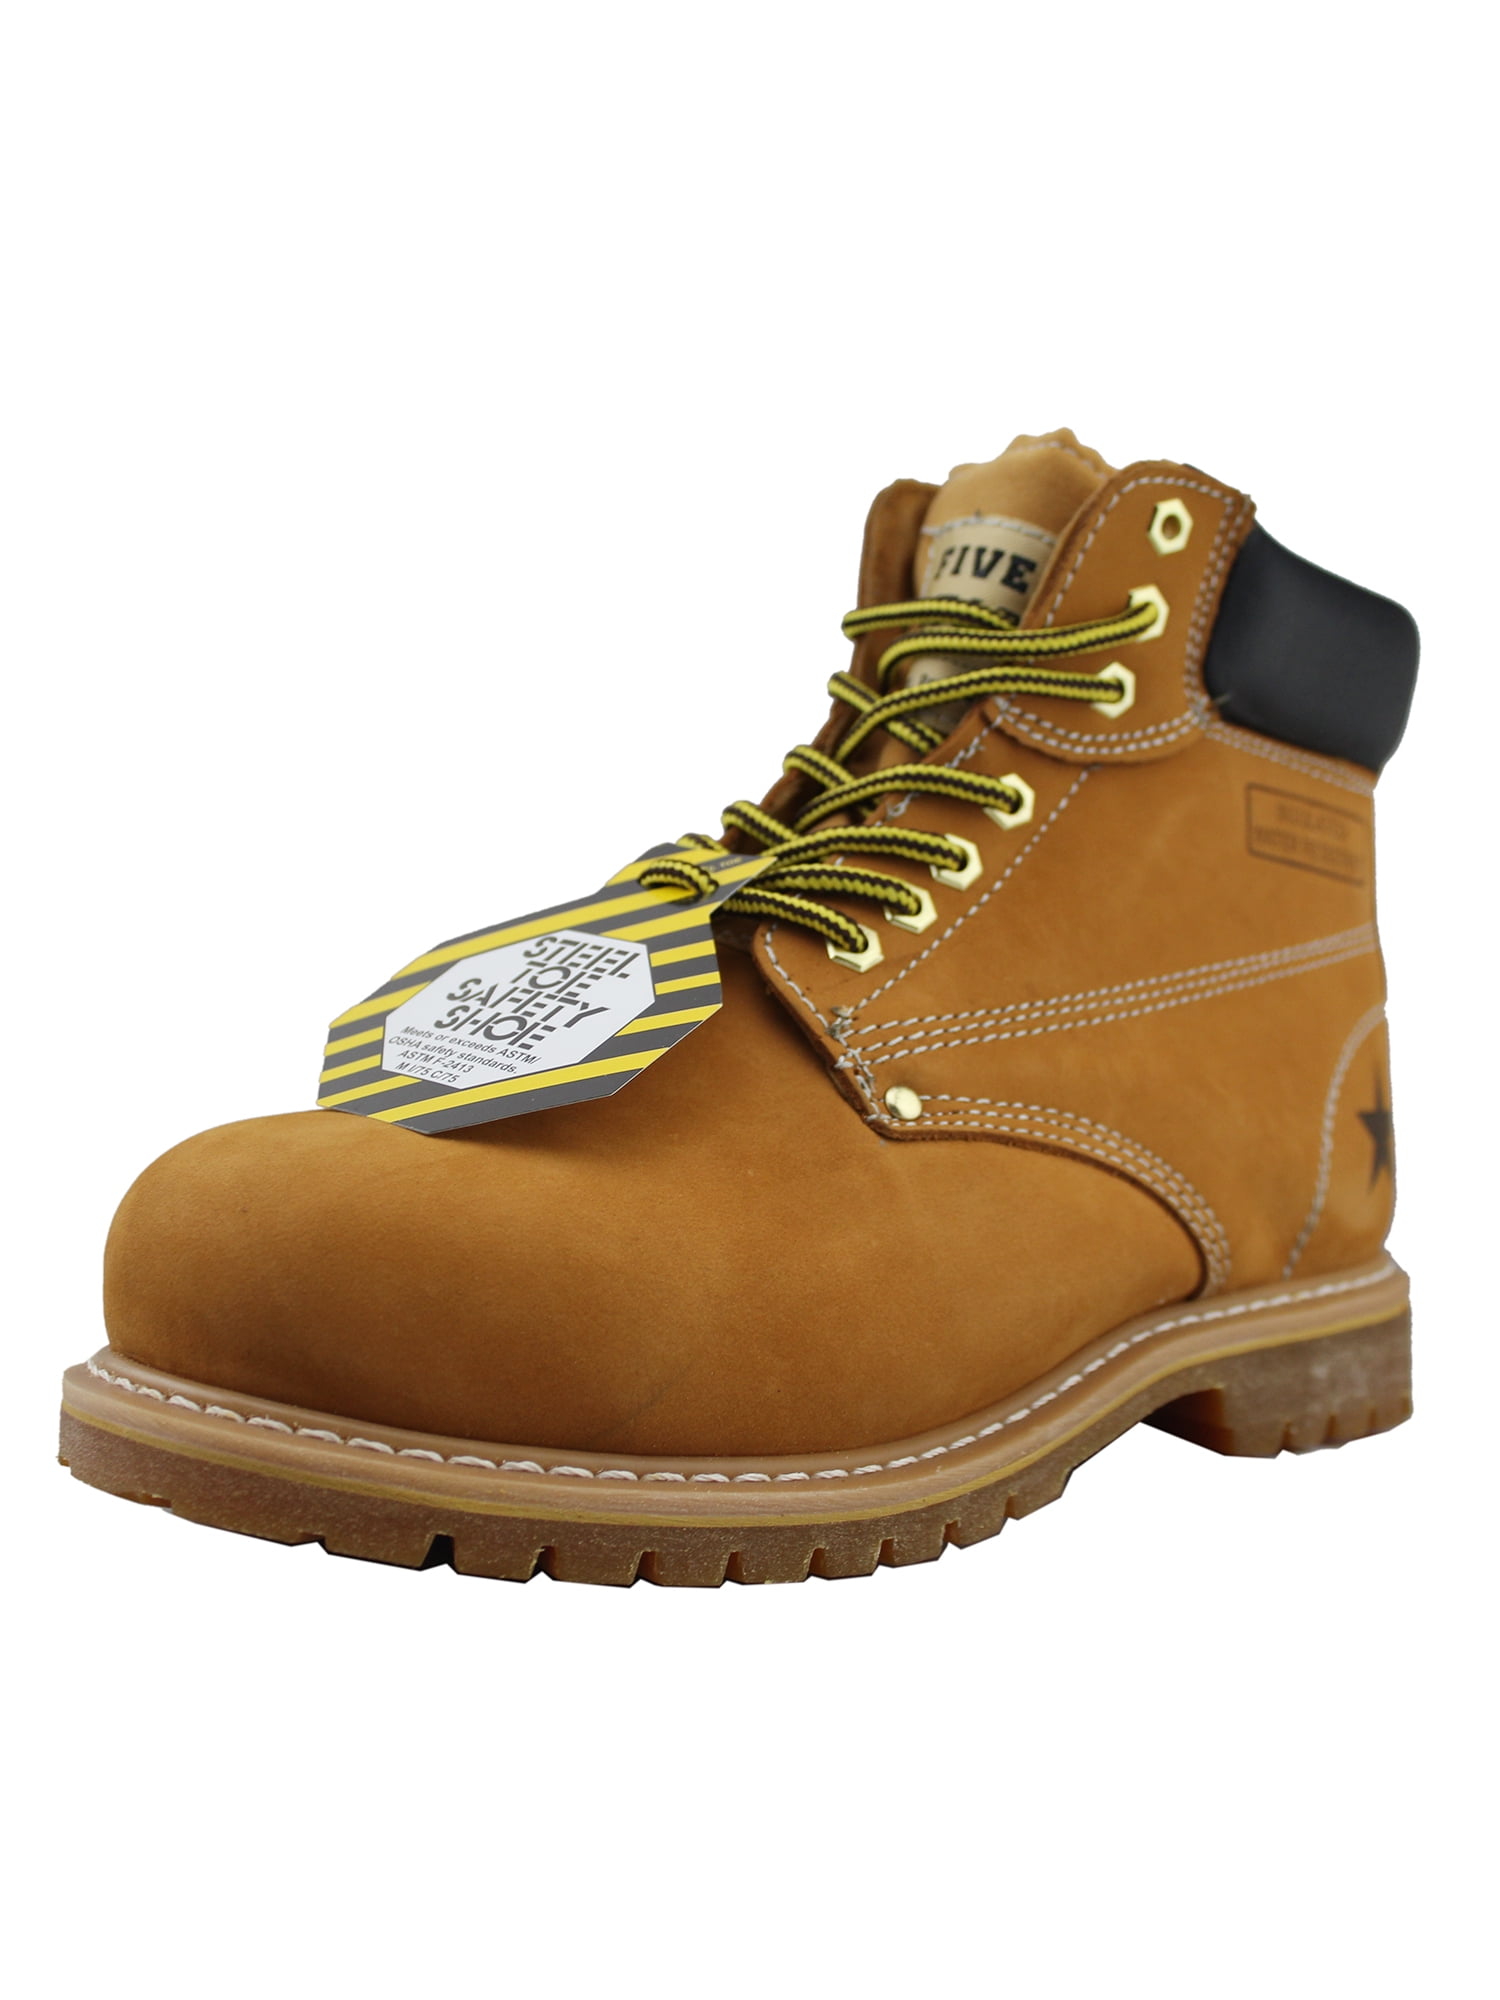 Mens Work Shoes Steel Toe Insulated 